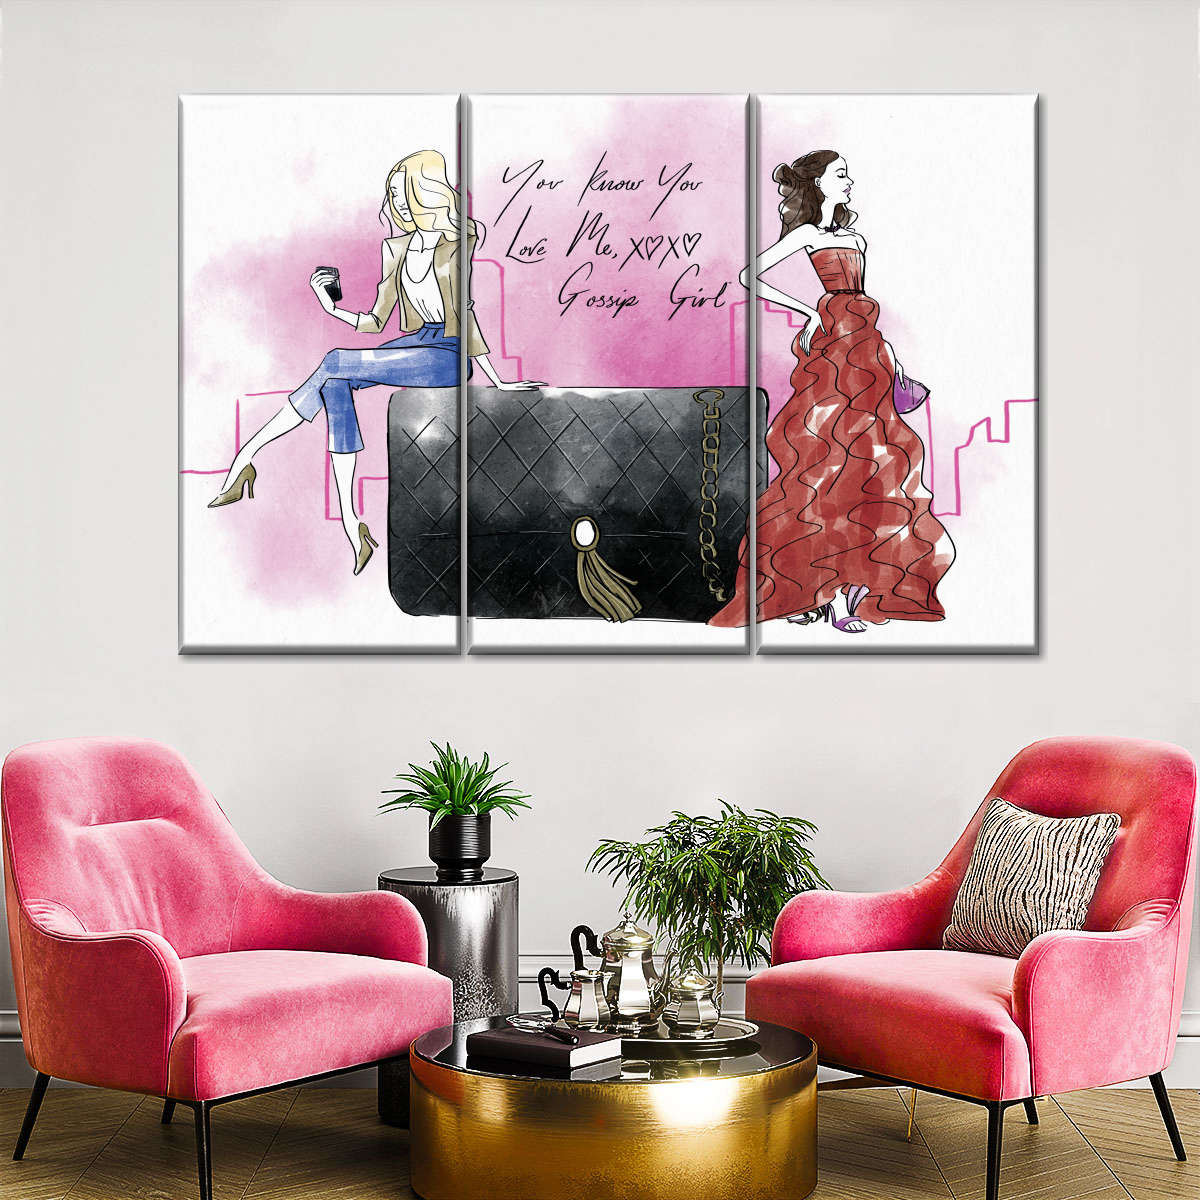 Black and White Blair Waldorf Photo Poster Gossip Girl Female Actress Print  Fashion Wall Art Canvas Painting Pictures Home Decor - AliExpress